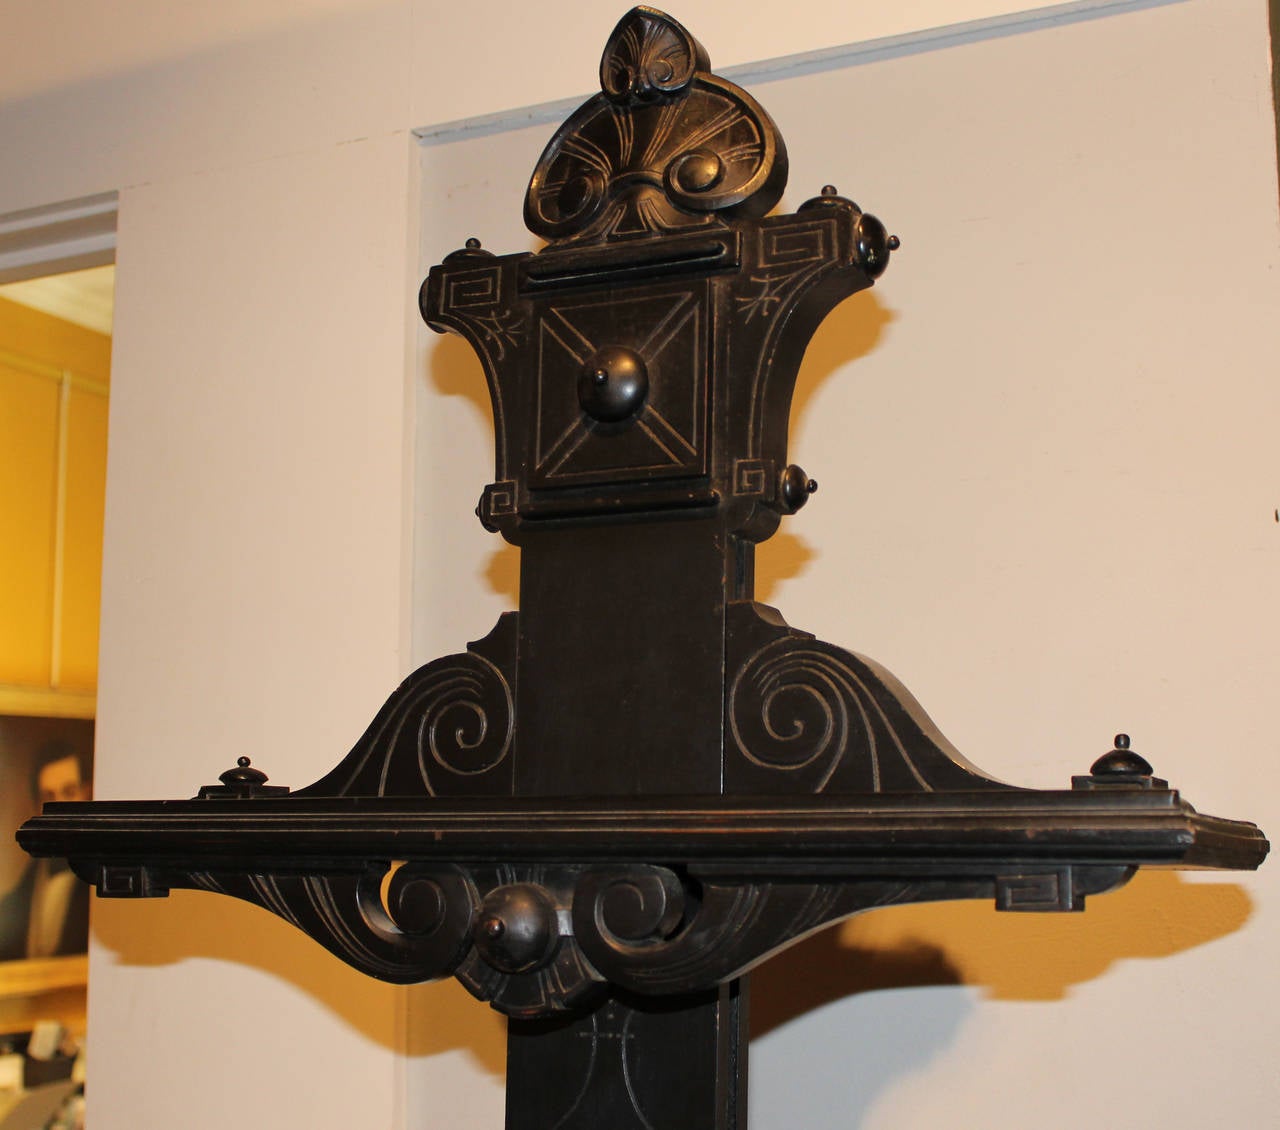 A fine example of a 19th century Aesthetic Movement ebonized wood easel with incised decoration. Provenance: The Ernest A. Rohdenburg III estate.